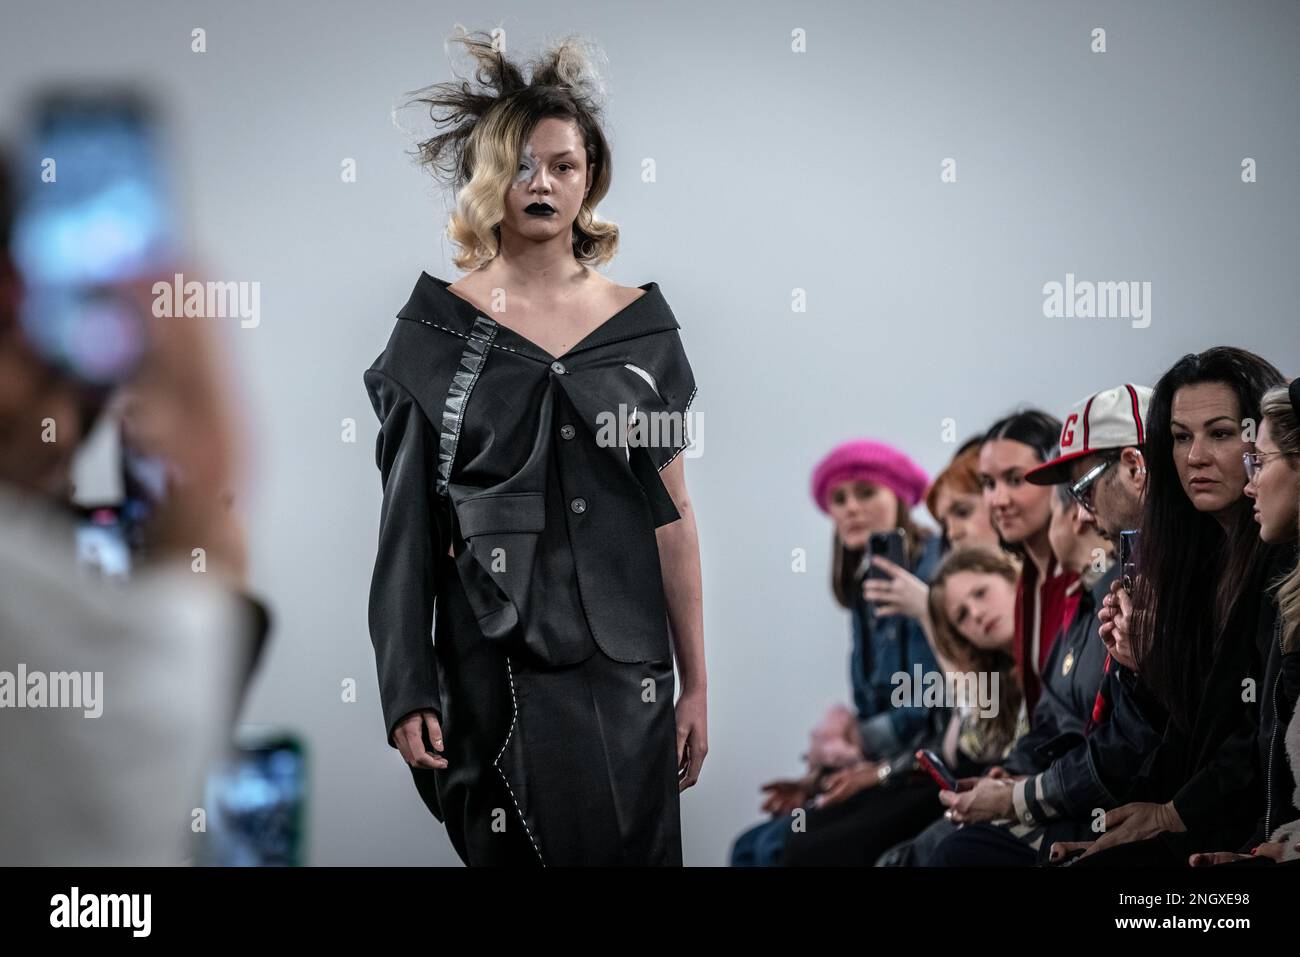 London, UK. 18th February 2023. London Fashion Week: IA London presents  'Asymmetrix' at Protein Studios in Shoreditch. The runway show of  sustainable, ethically produced womenswear holds a strong artistic brand  identity and